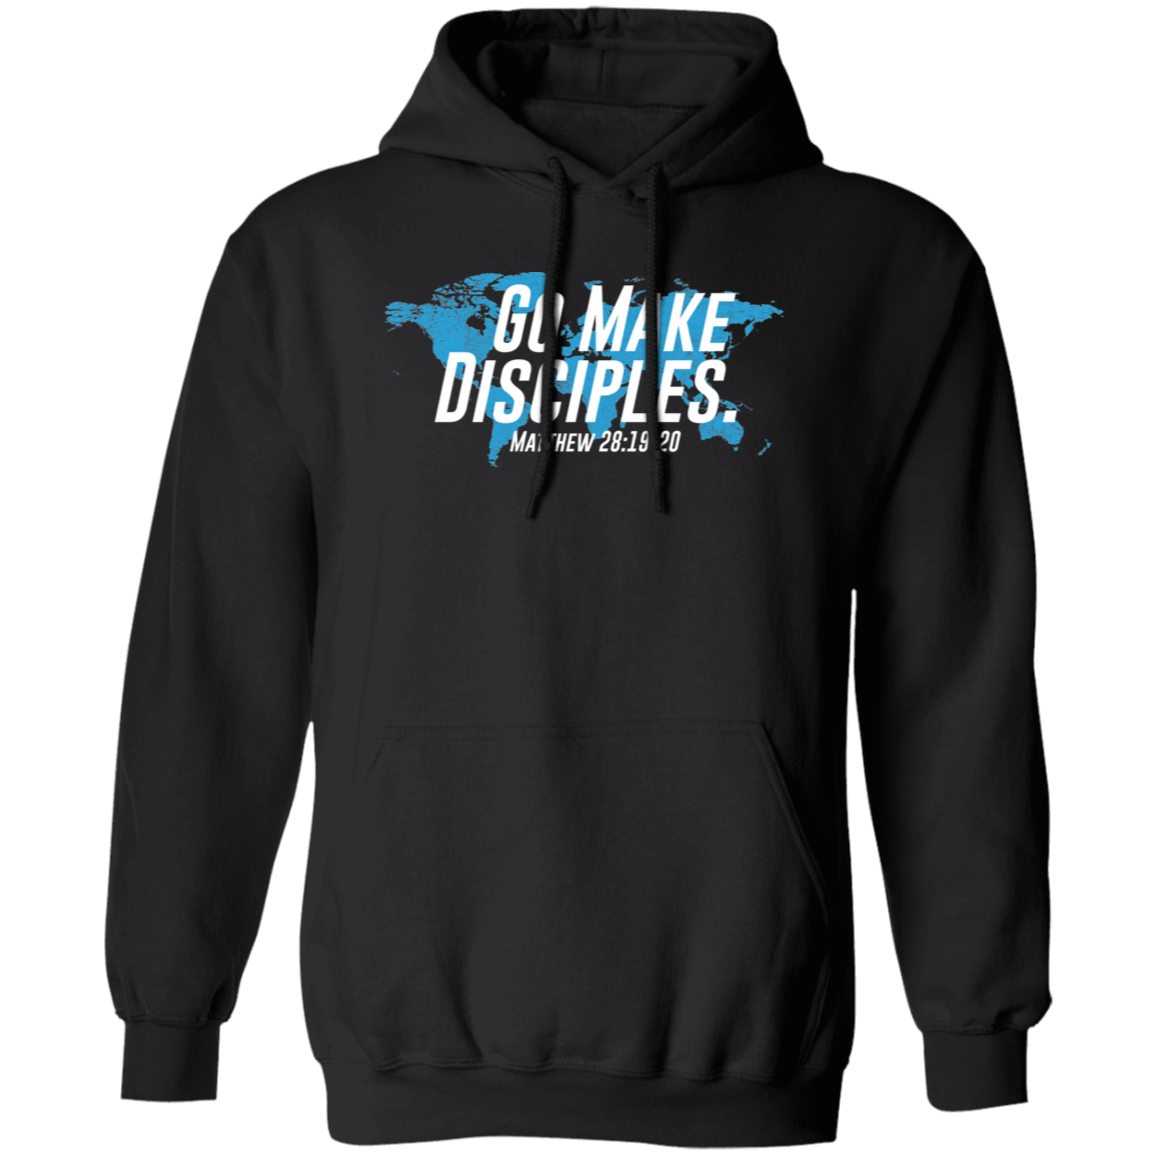 Make Disciples - Pullover Hoodie